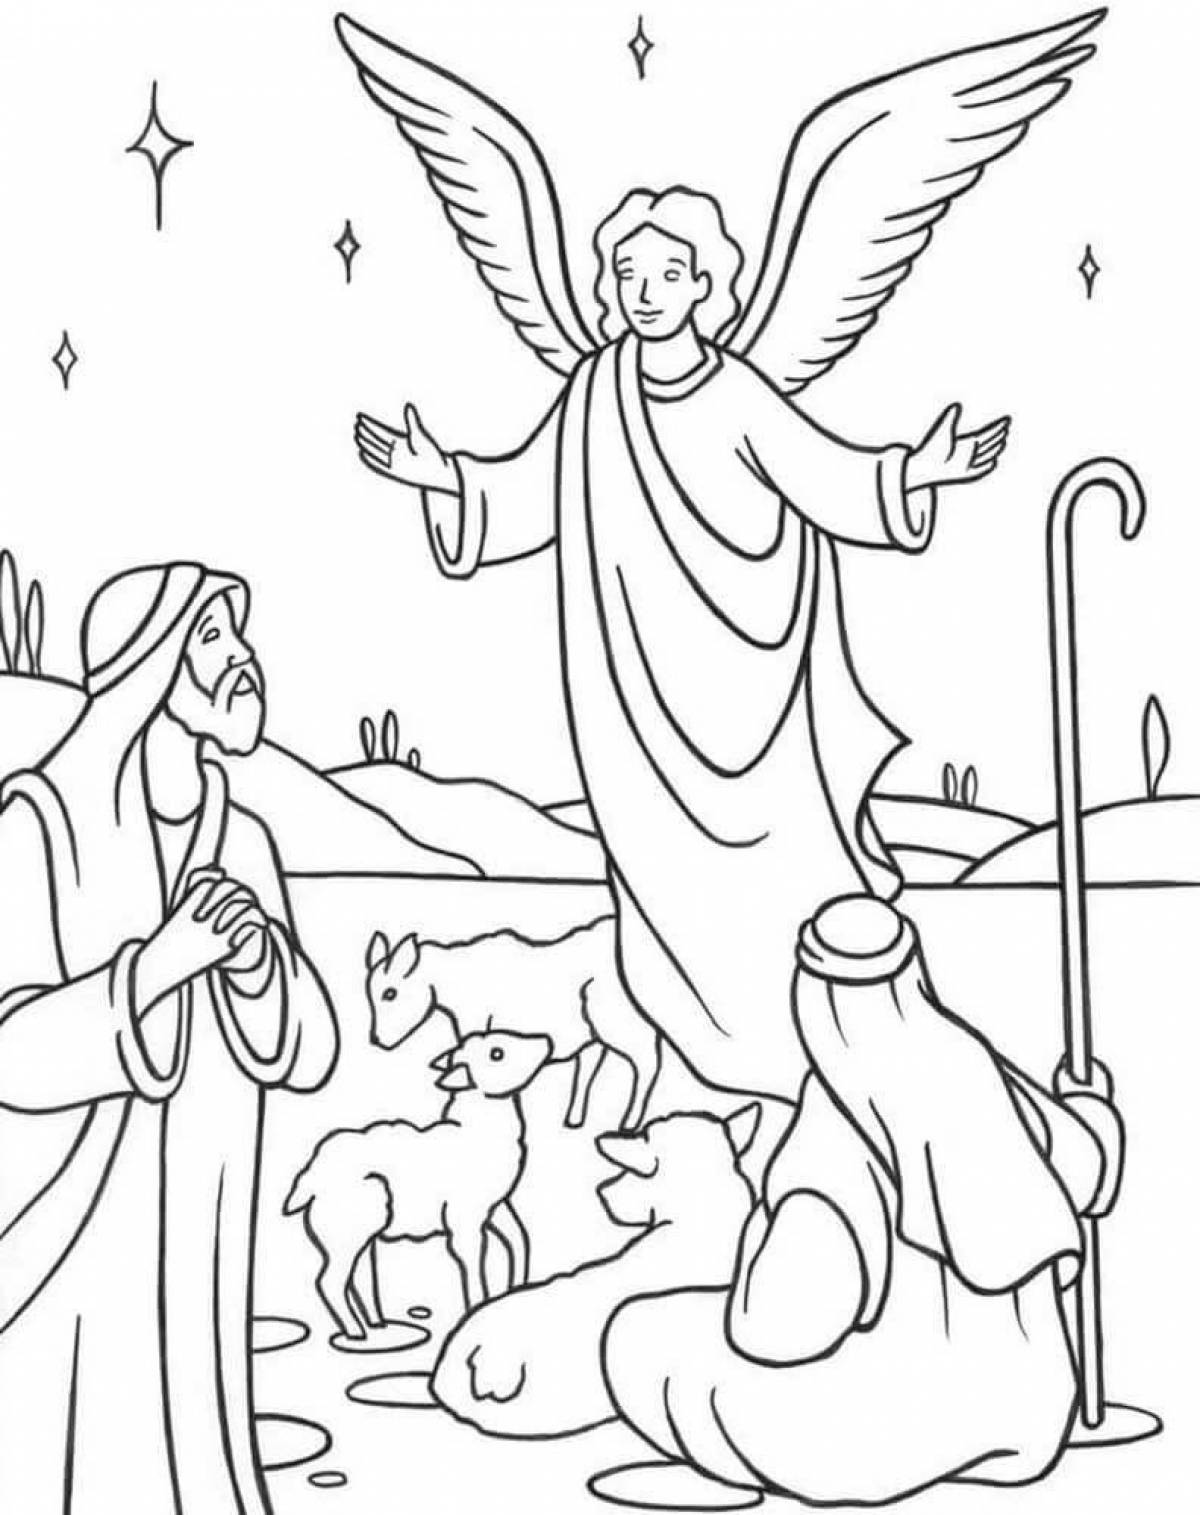 Gorgeous Christmas coloring book for kids orthodoxy